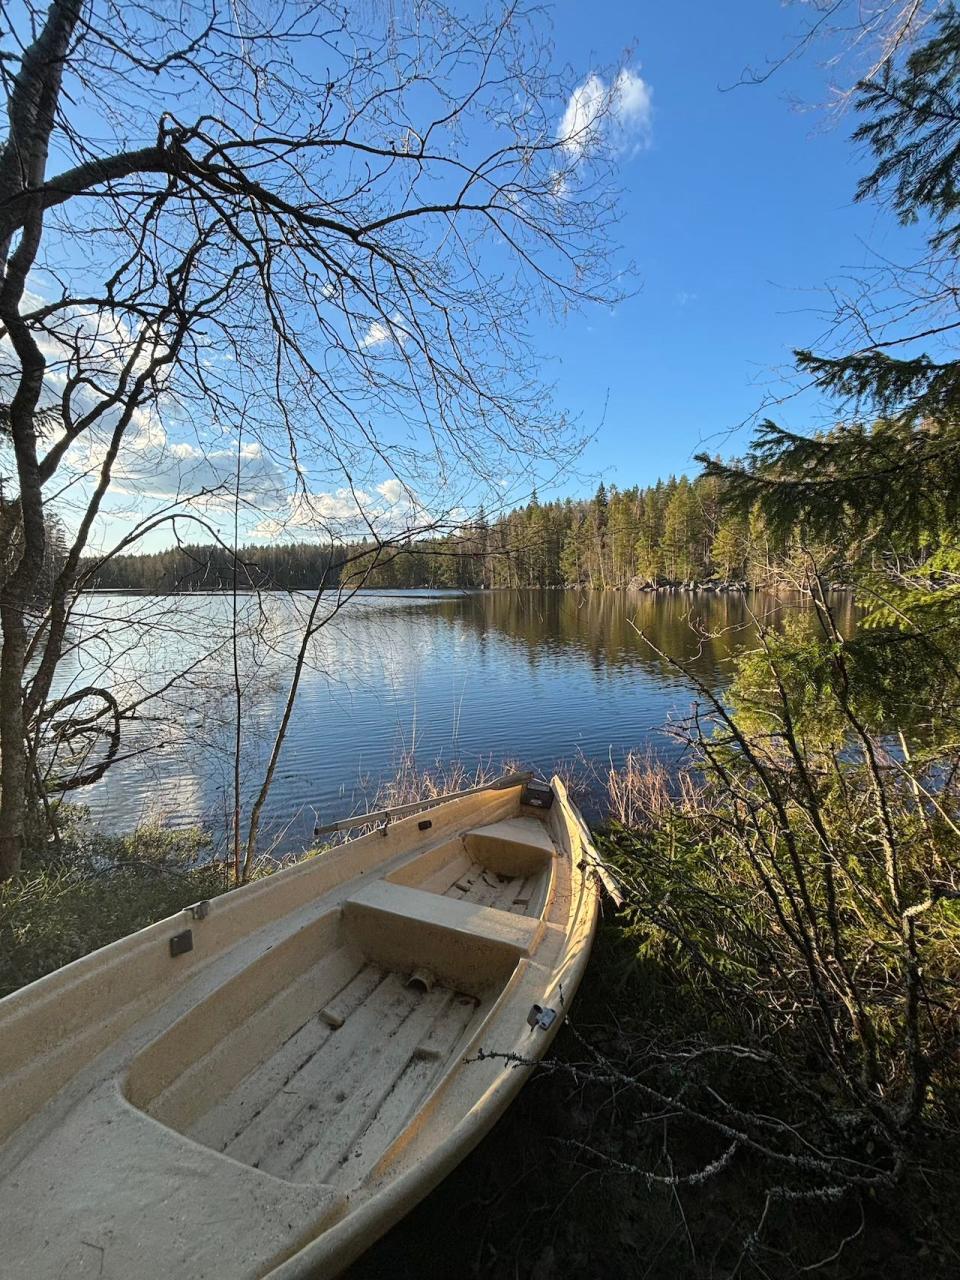 A boat on a shore in front a lake surrounded by trees.